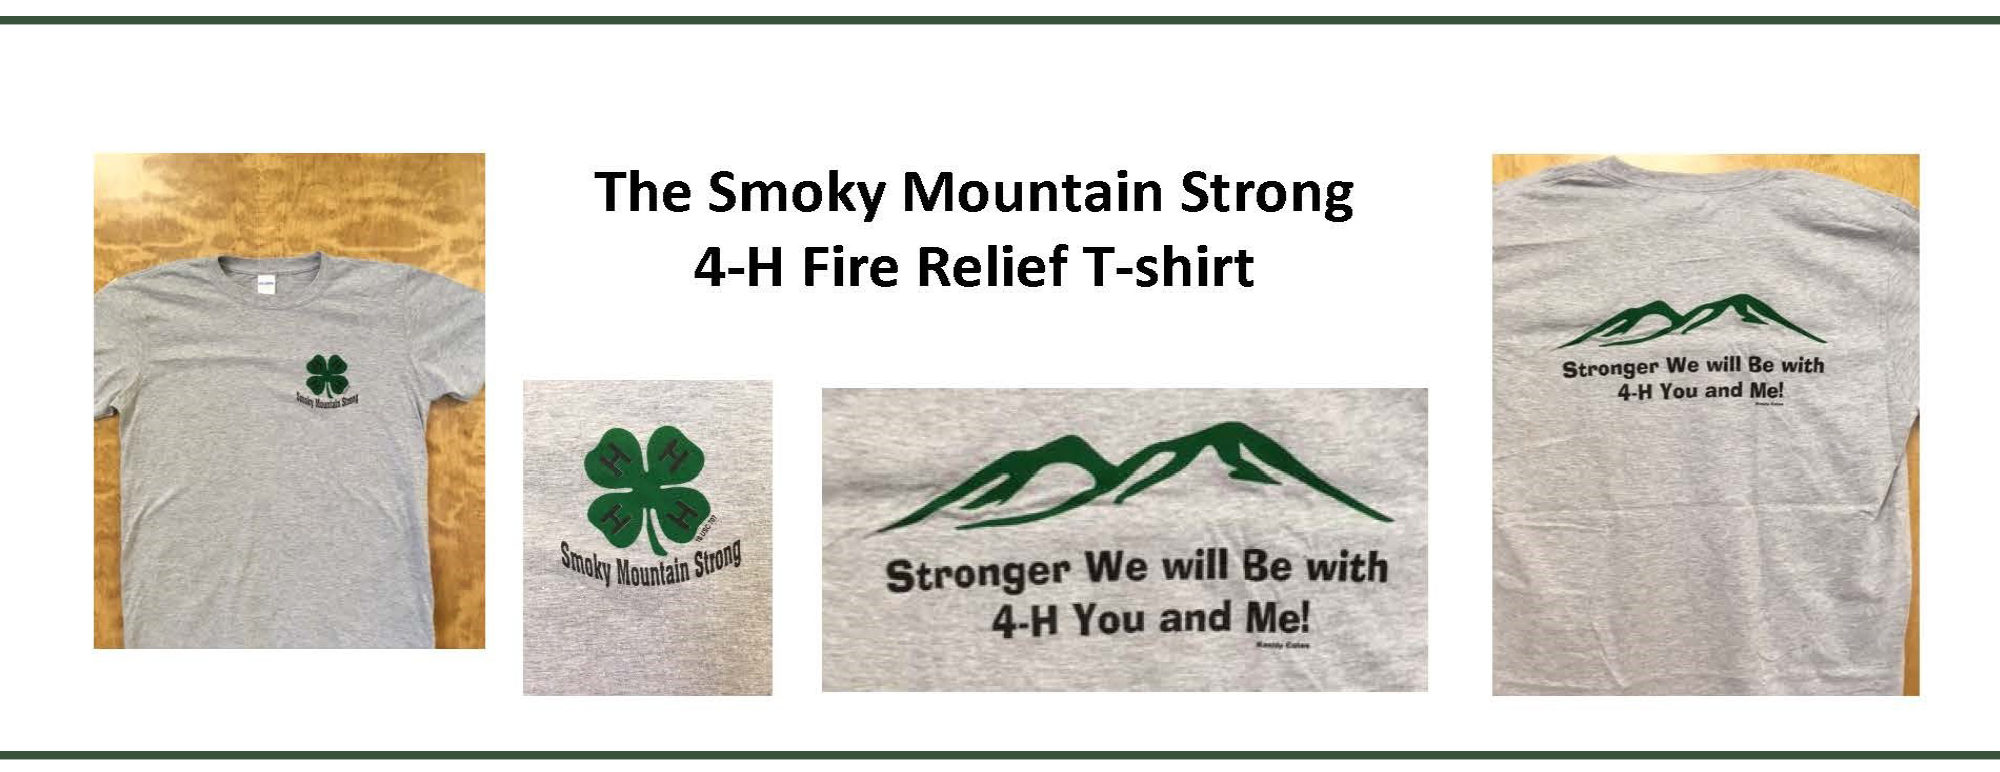 The Smoky Mountain Strong 4-H Fire Relief T-Shirt